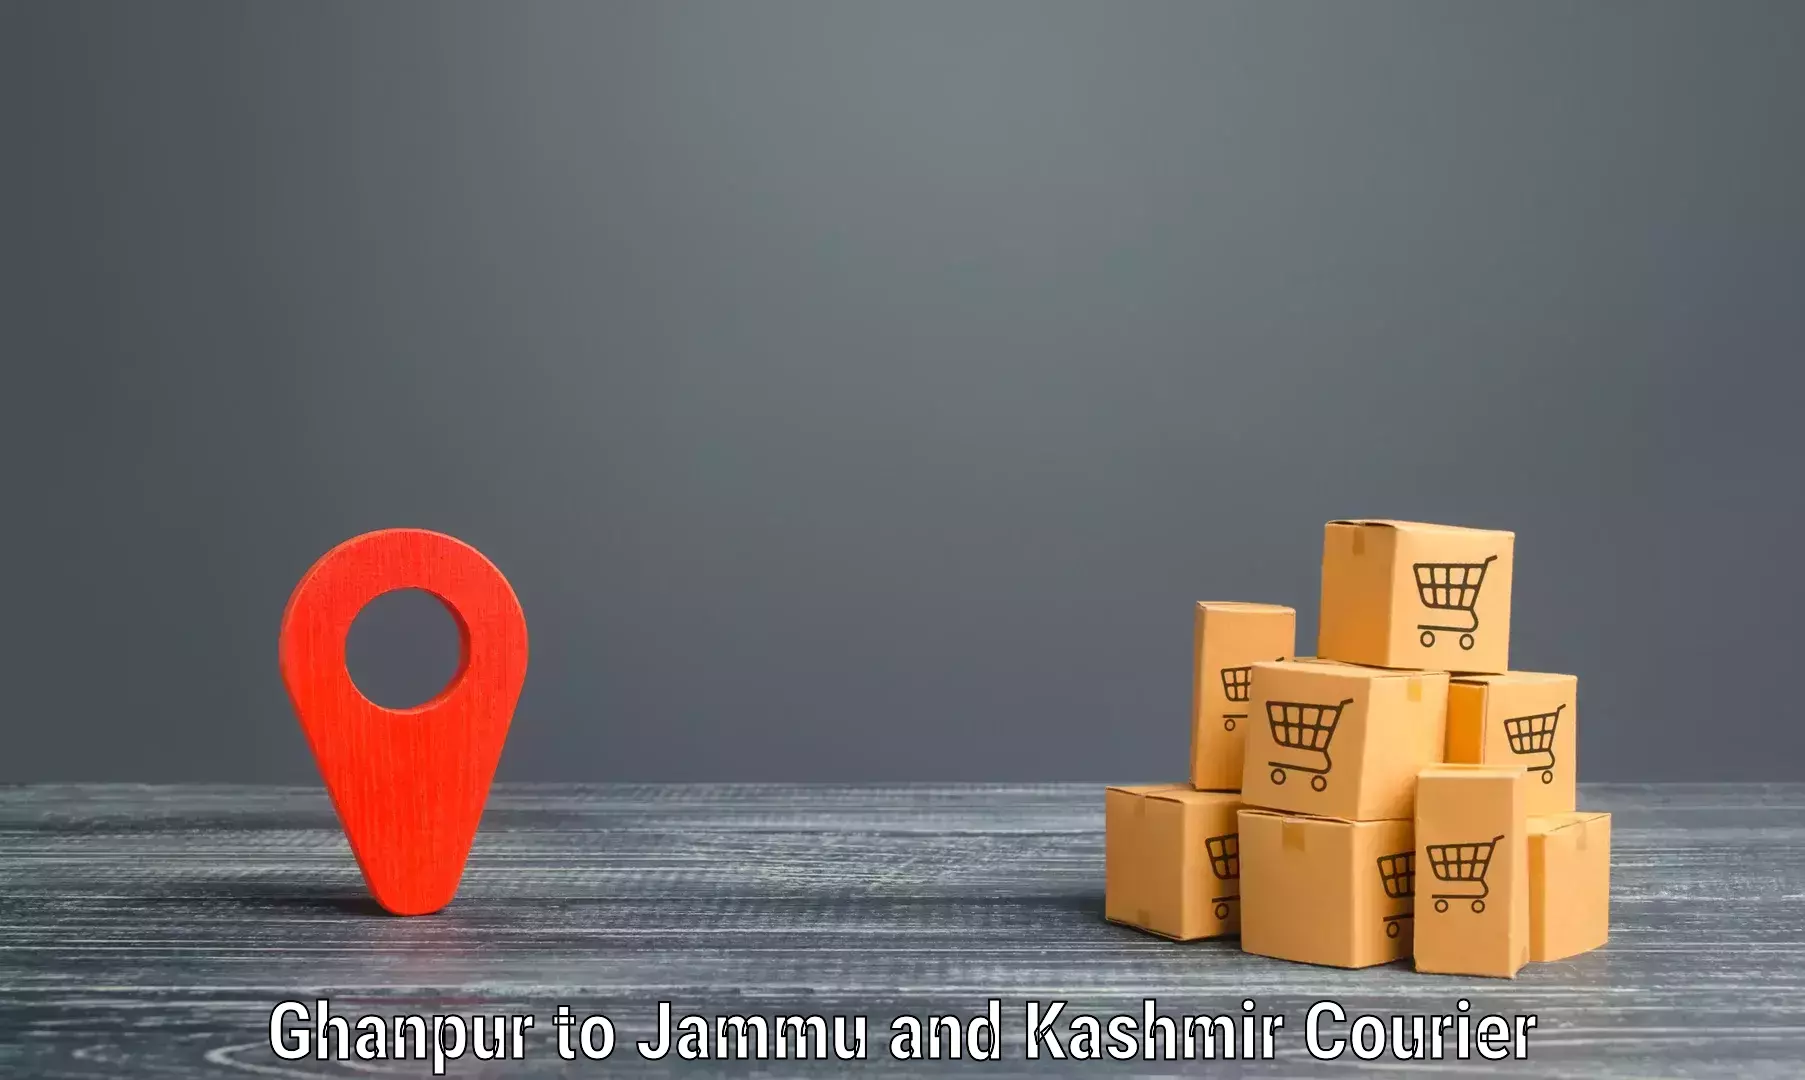 Courier service comparison in Ghanpur to Jammu and Kashmir